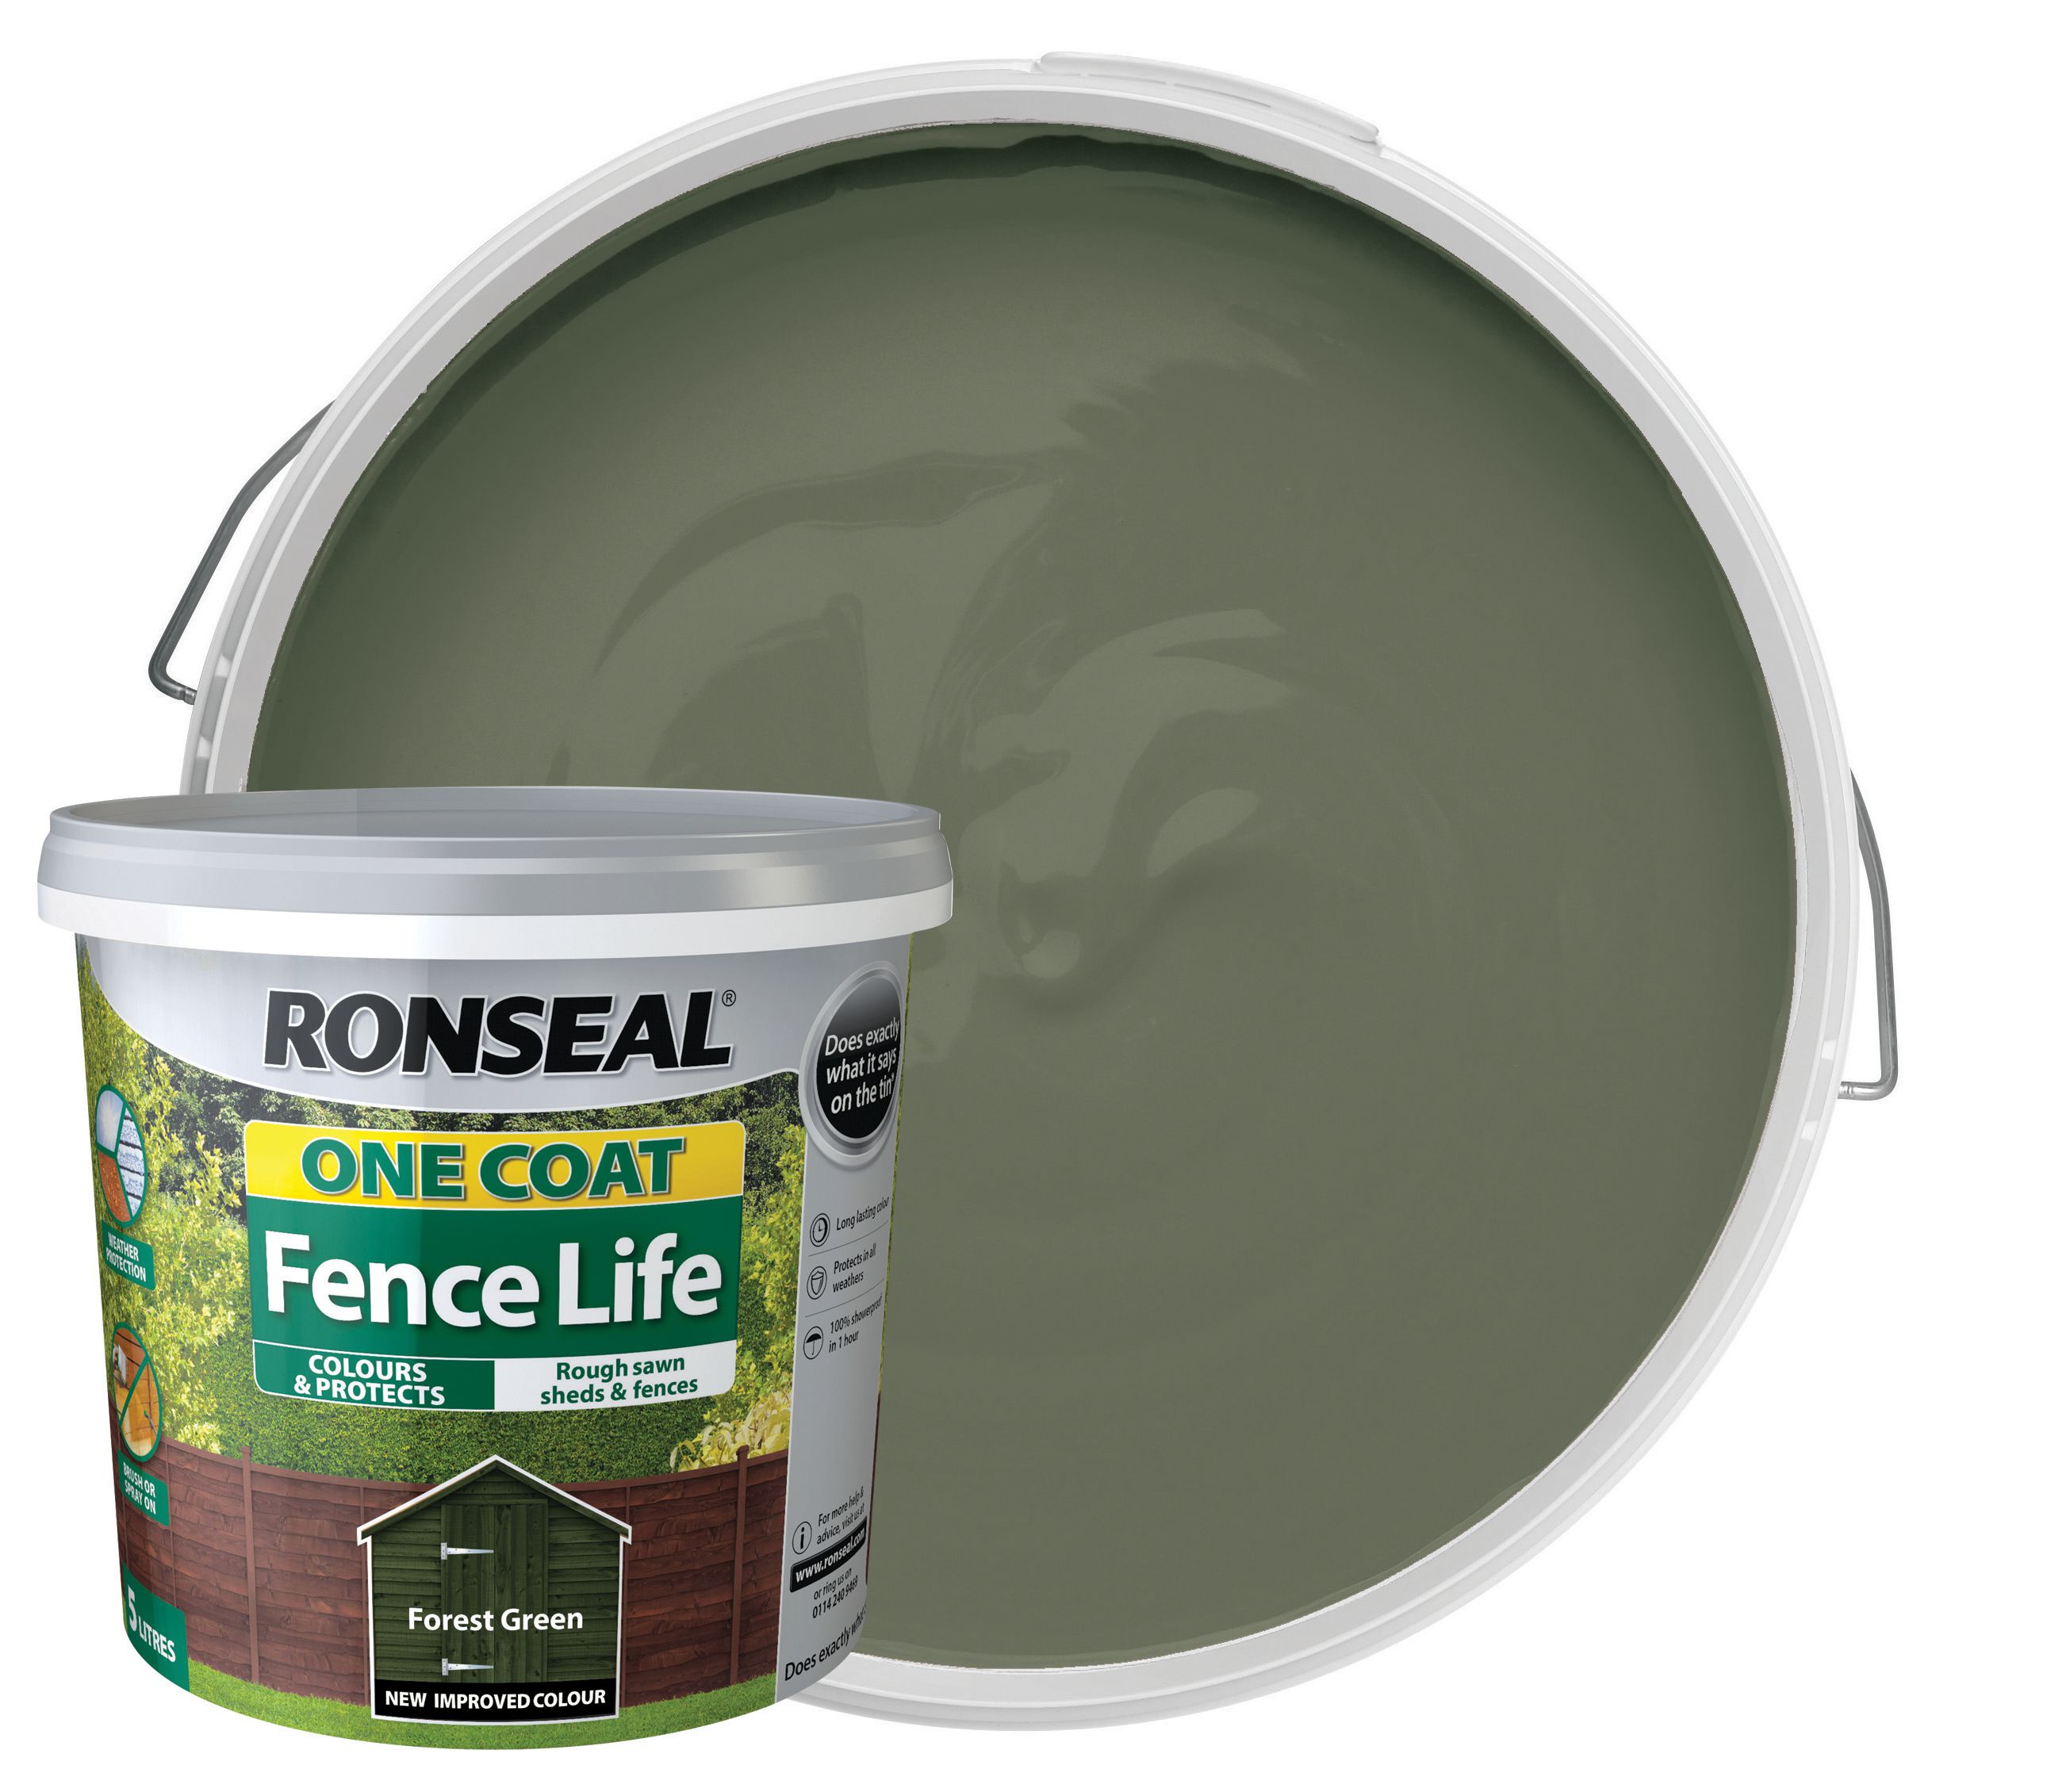 Image of Ronseal One Coat Fence Life Matt Shed & Fence Treatment - Forest Green 5L